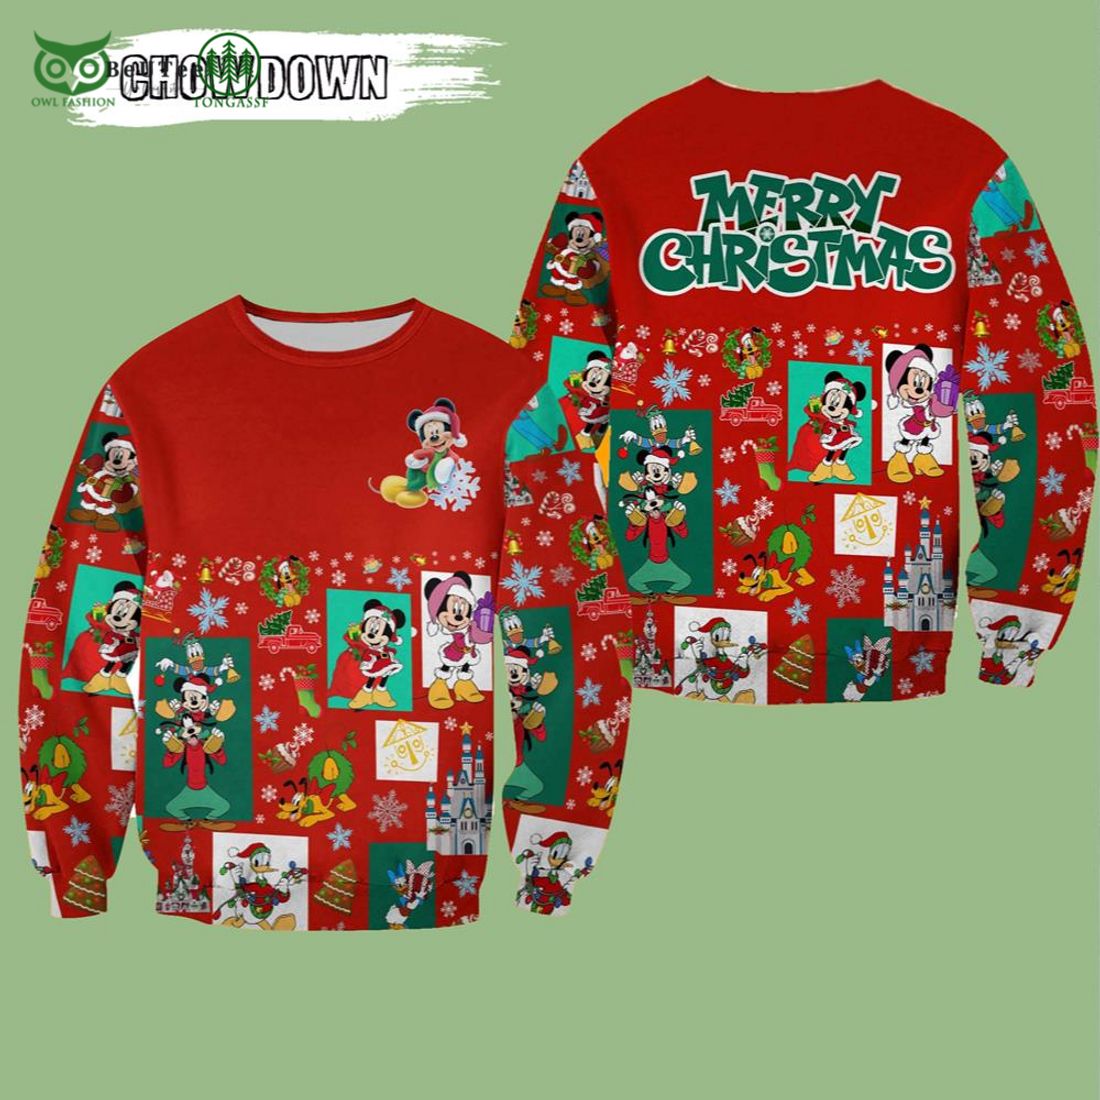 mickey mouse minnie donald pattern disney characters ugly christmas sweater 1 XqDgW